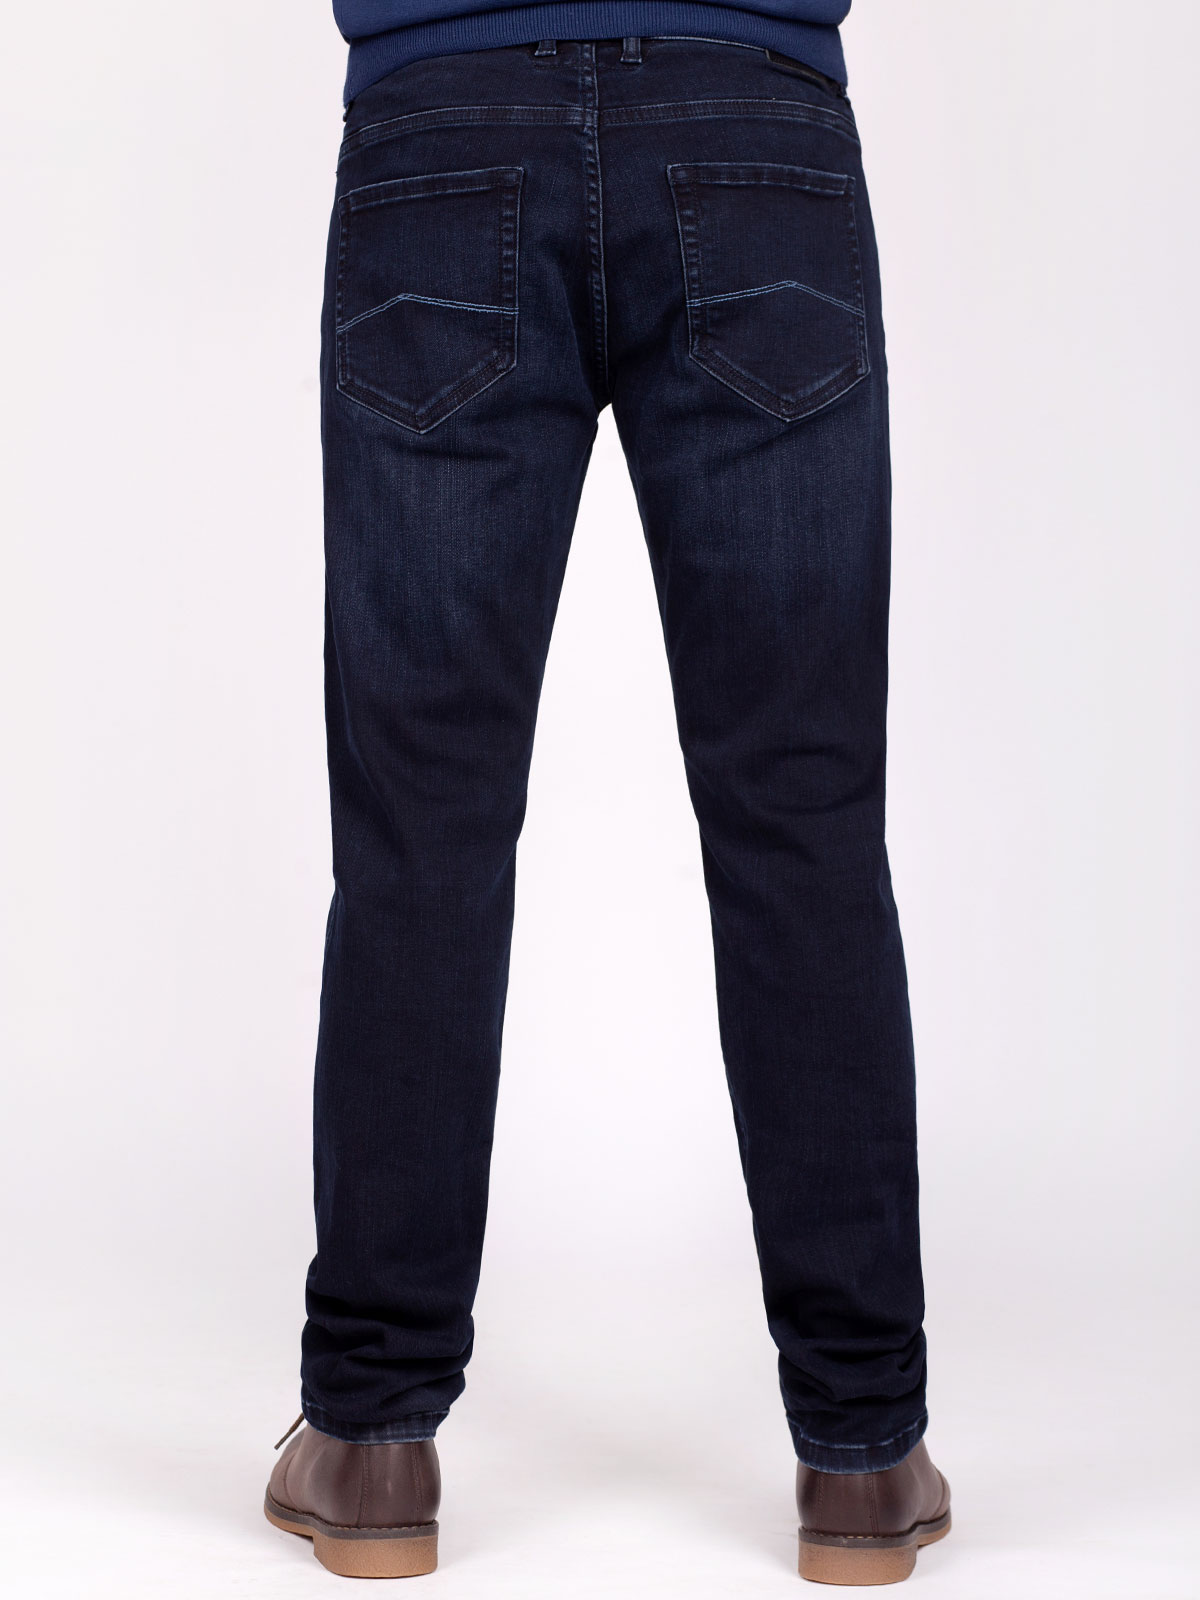 Navy blue jeans with tonal stitching - 62159 € 78.18 img3